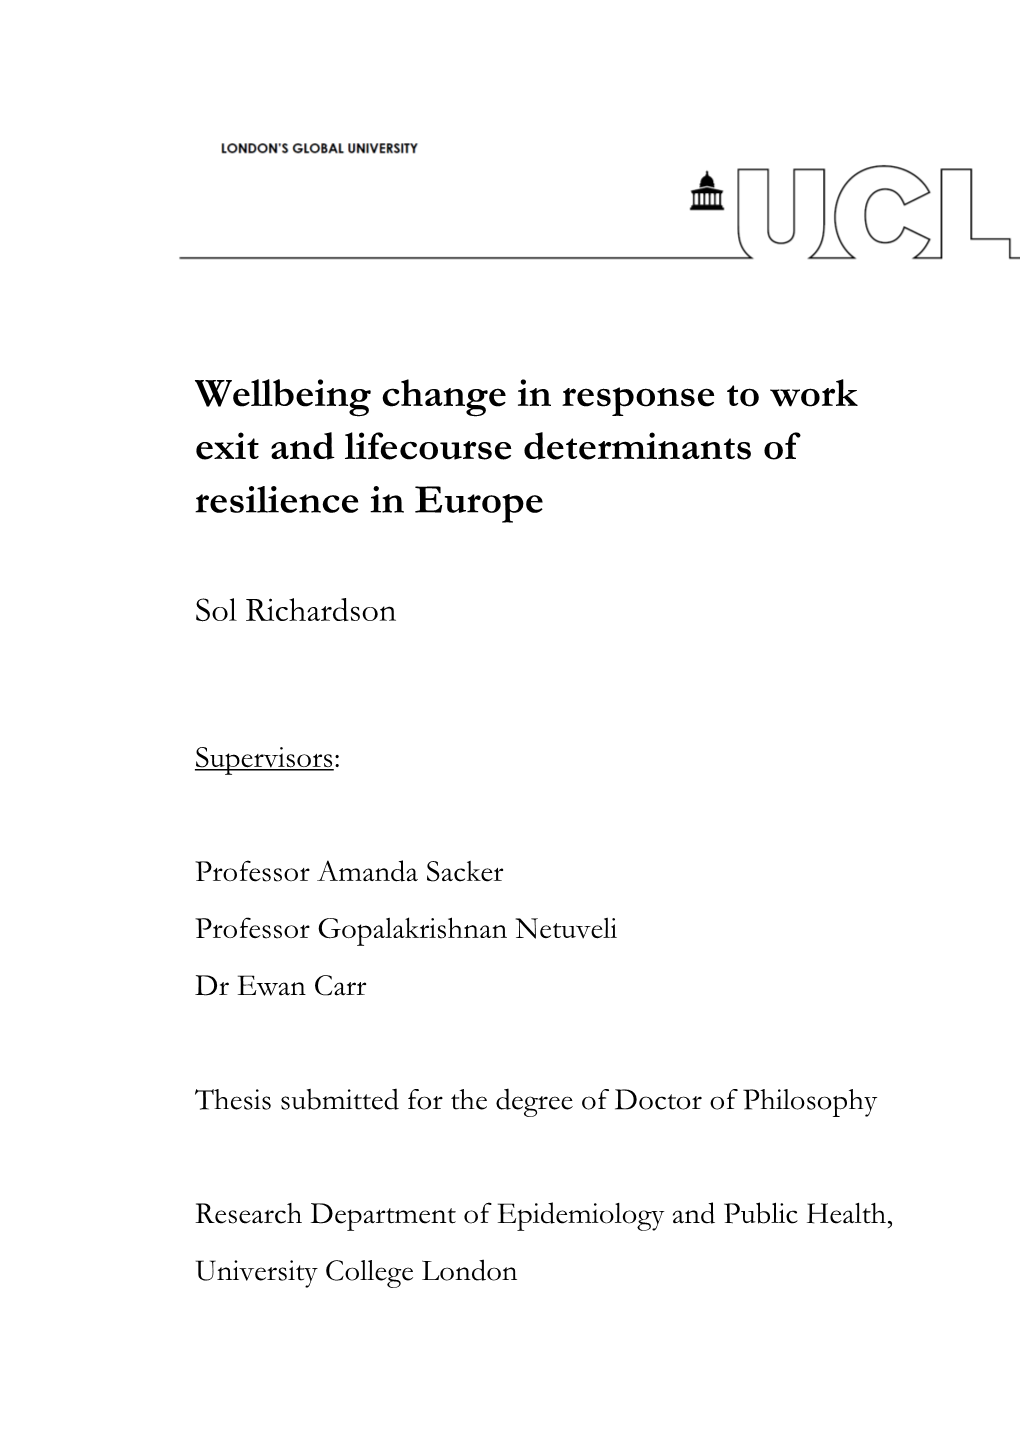 Wellbeing Change in Response to Work Exit and Lifecourse Determinants of Resilience in Europe